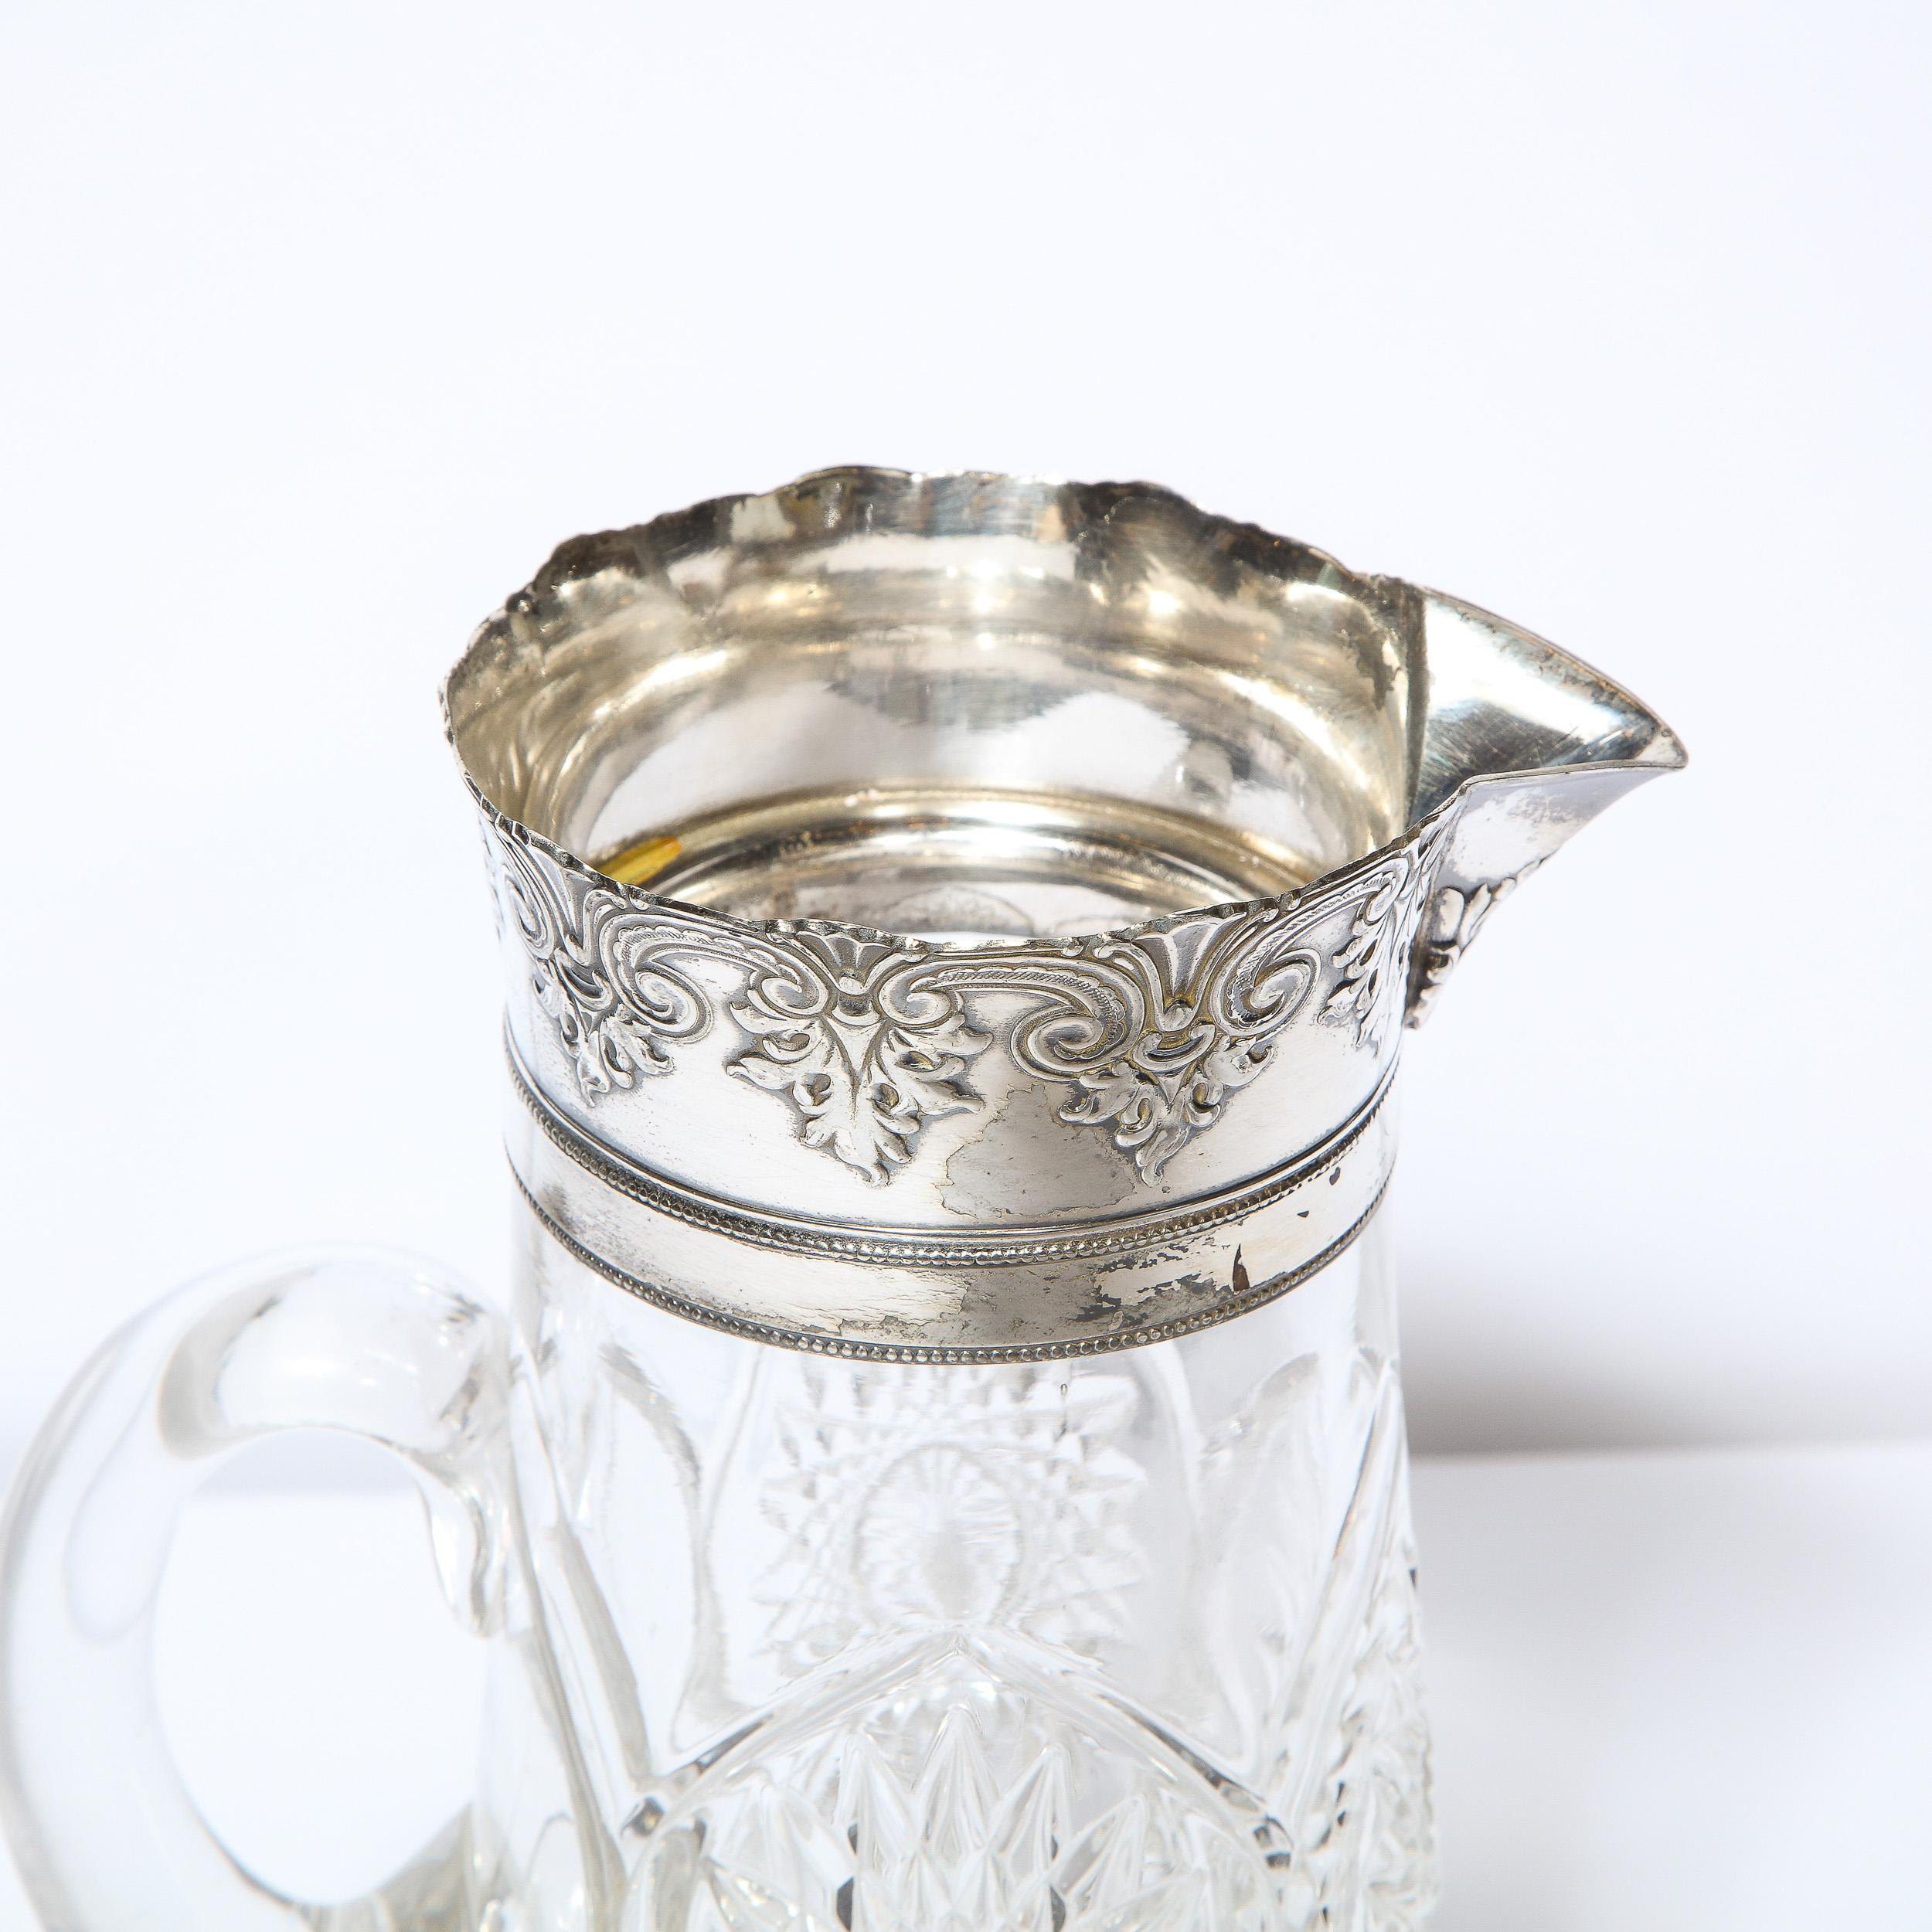 1940s Art Deco Pressed Glass Pitcher with Geometric Details & Silver Plated Top 10